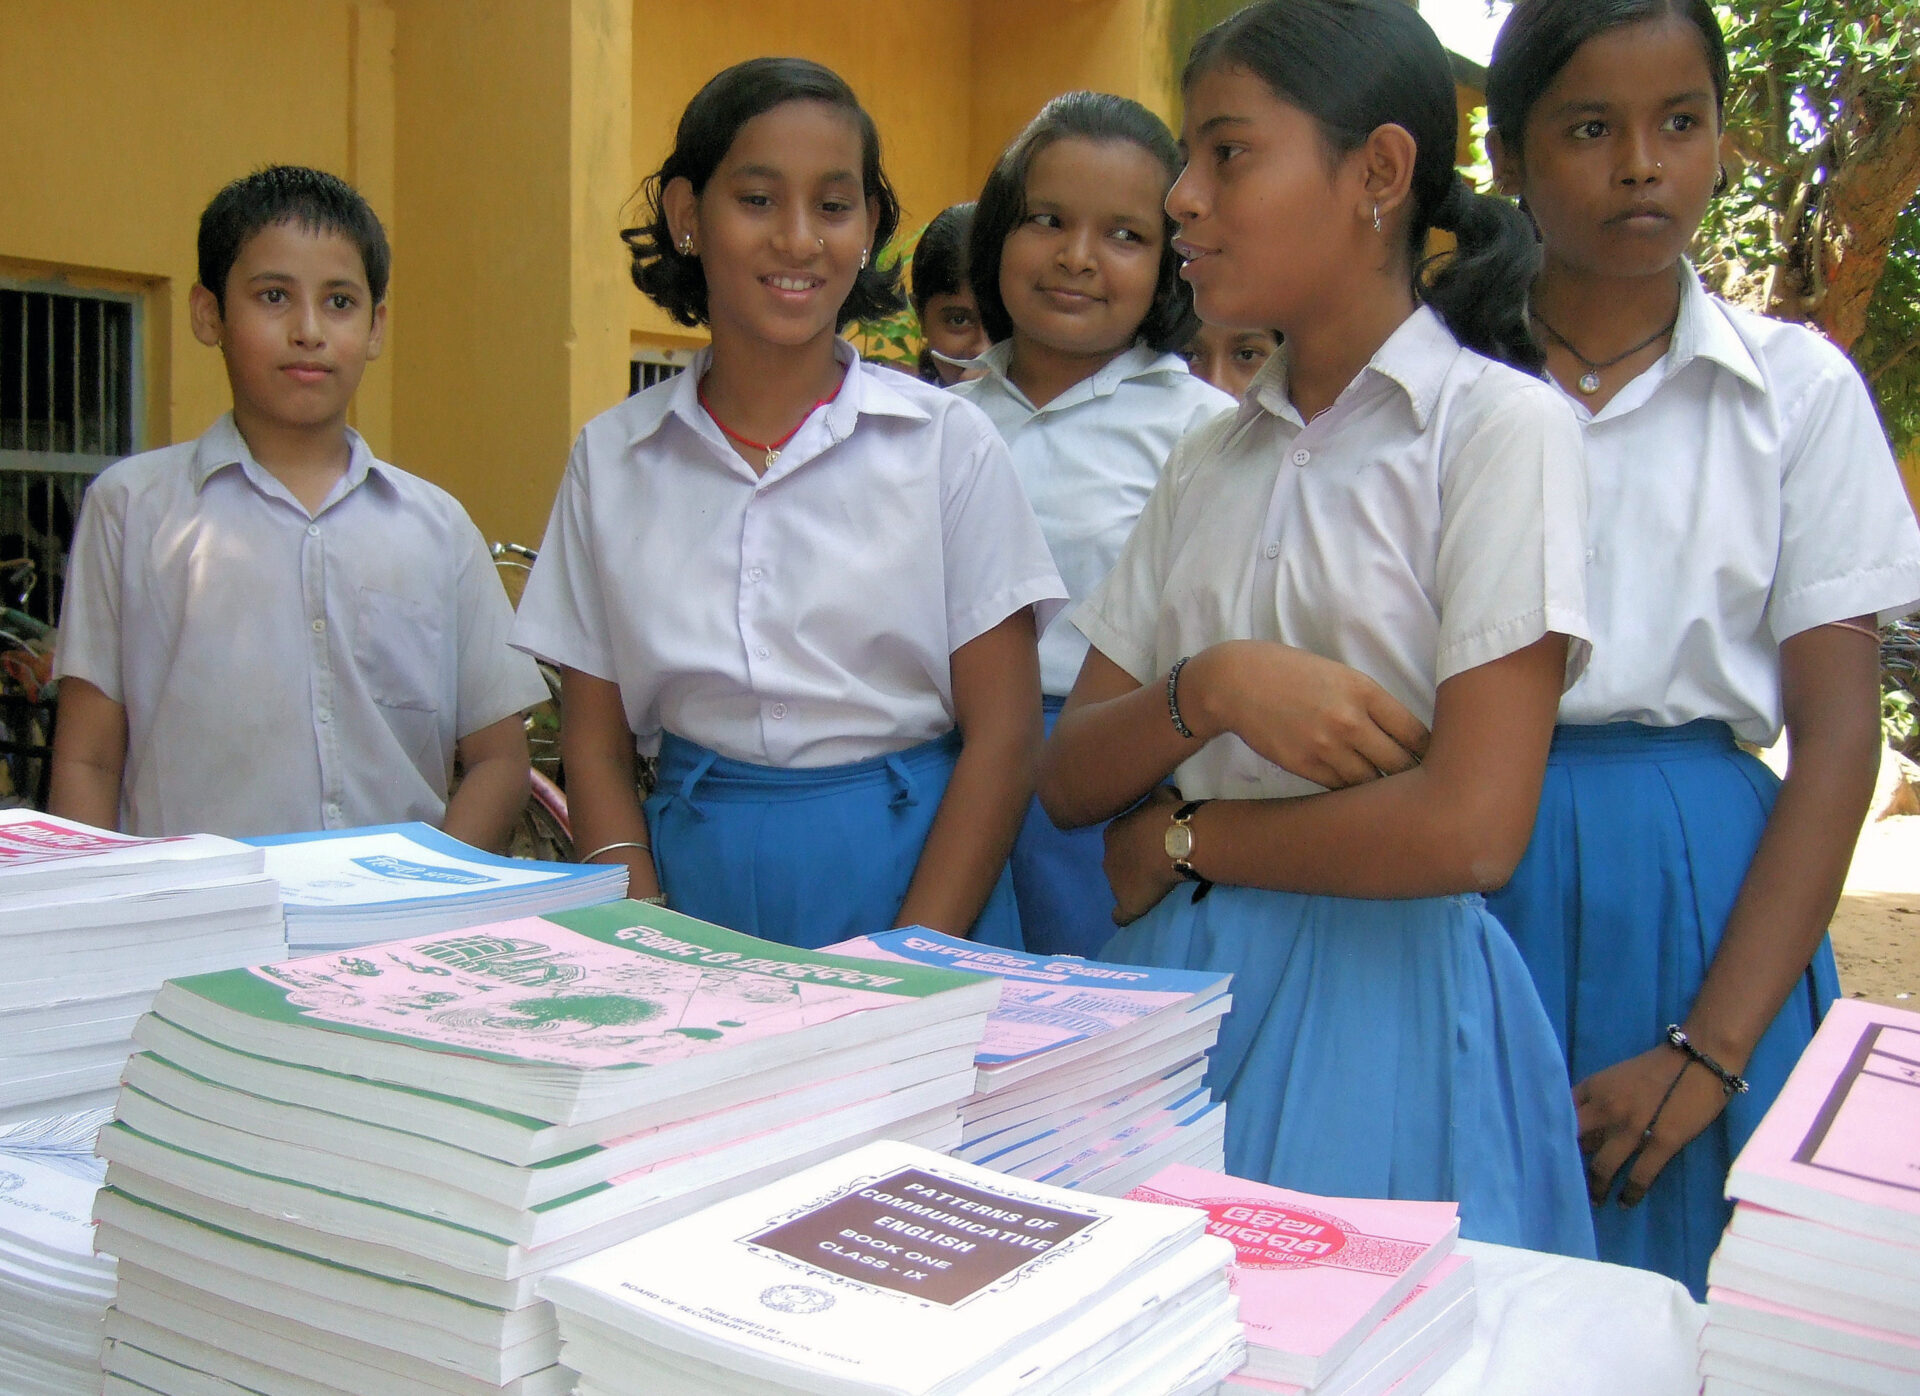 A group of children standing next to books.